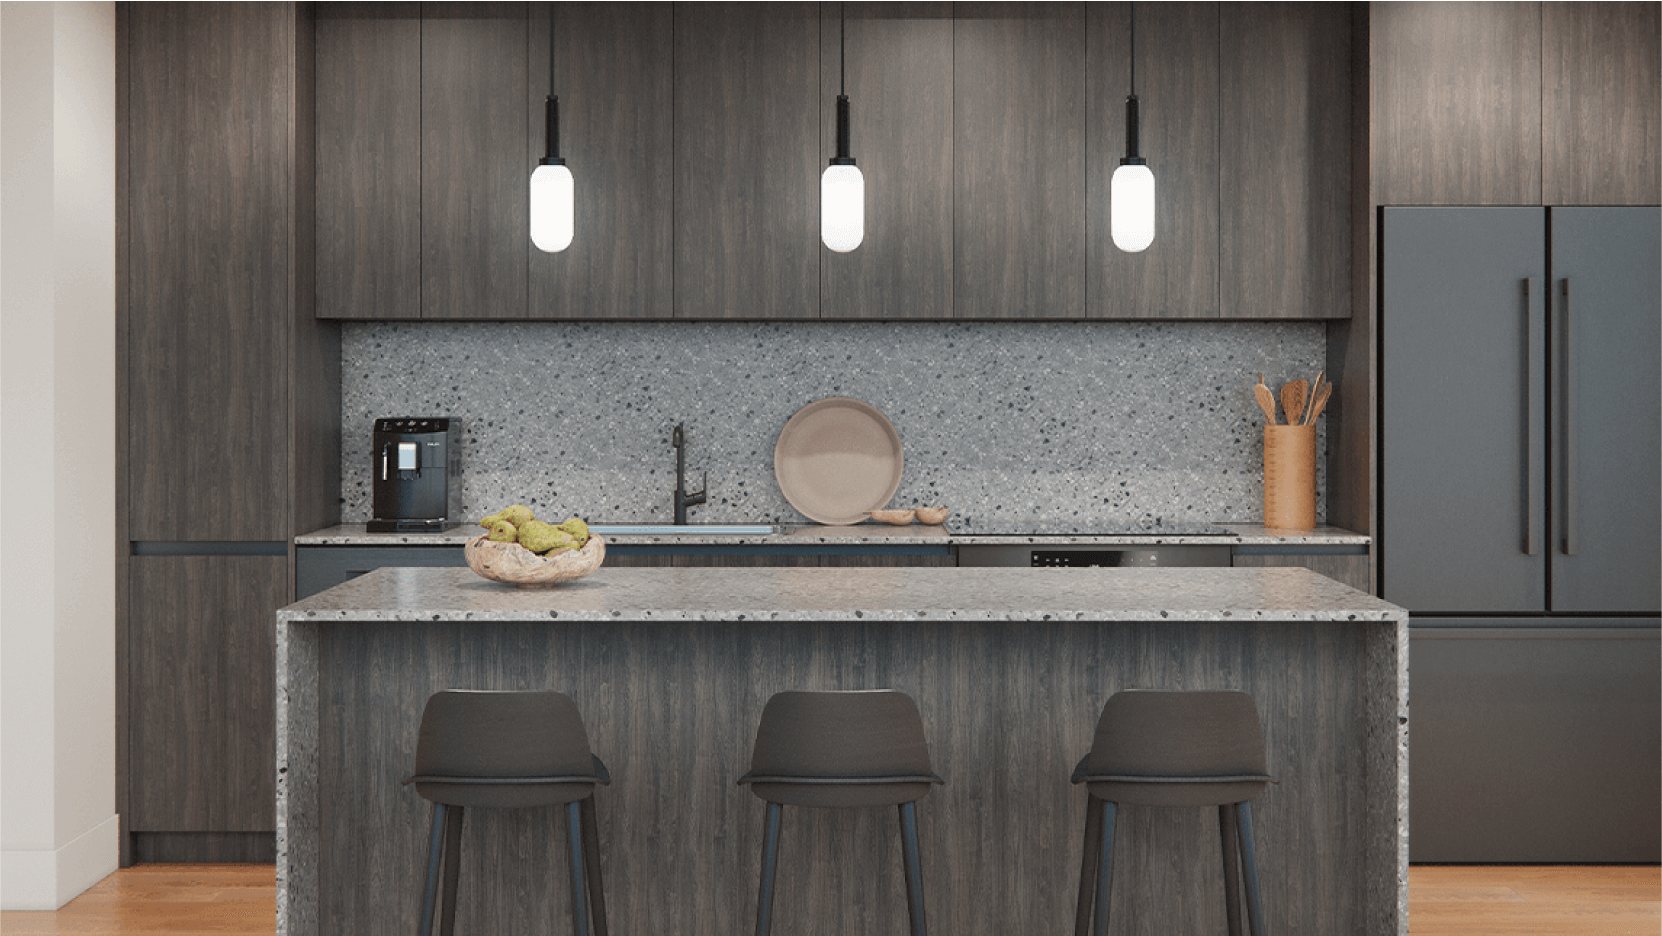 Vesper ATX has stylish modern kitchens with a spacious breakfast bar, elegant pendant lights, and dark wood cabinets, set in a downtown Austin luxury condo.